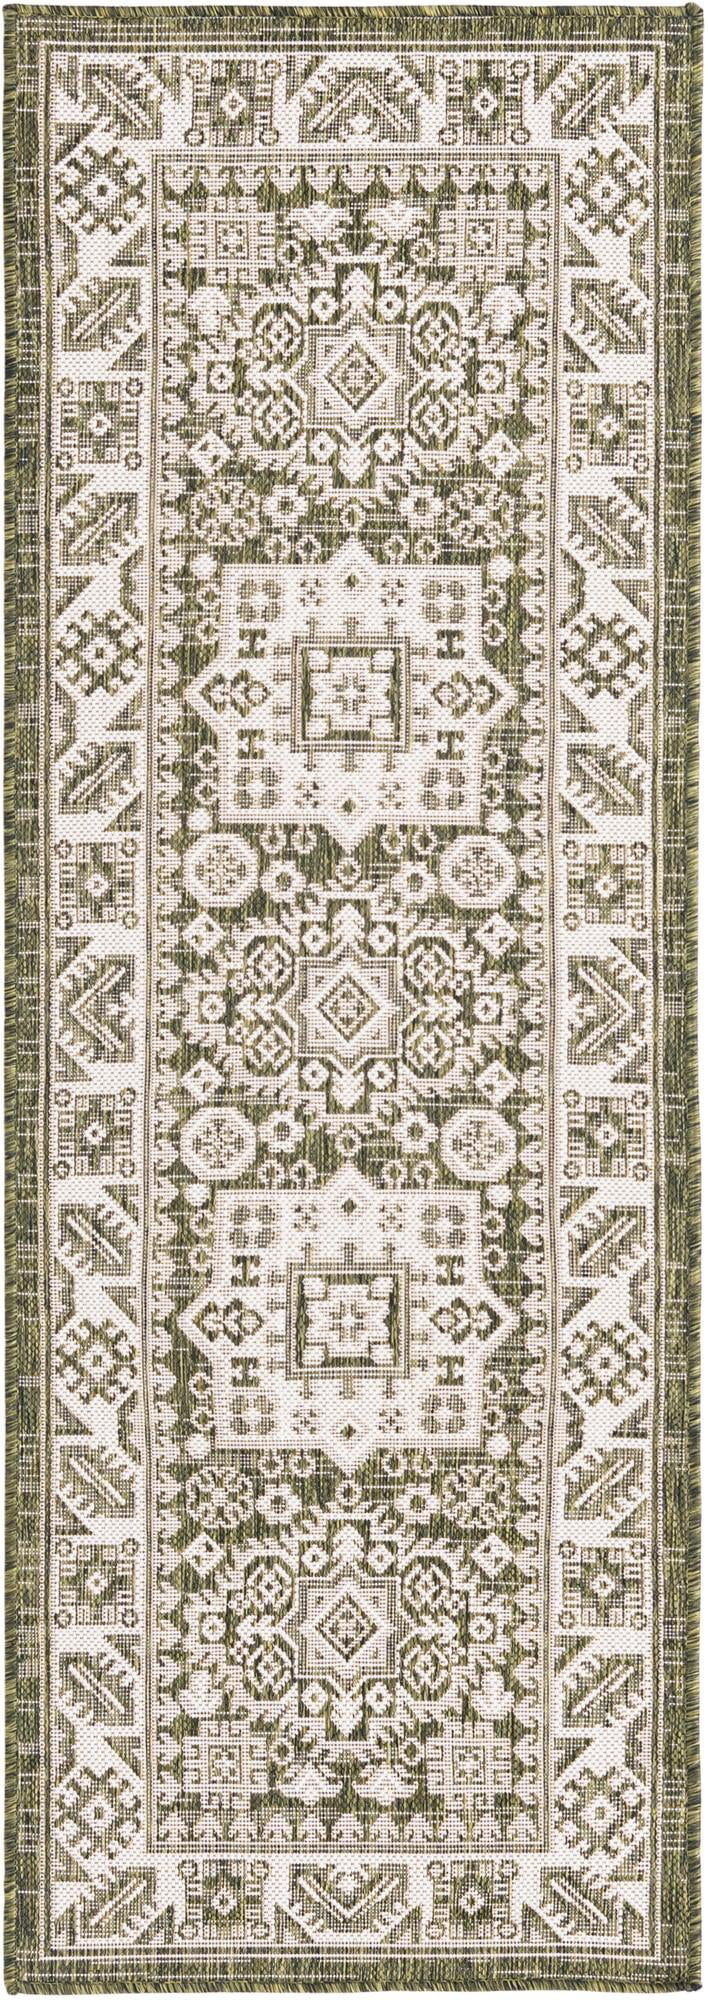 Rugs.com Outdoor Aztec Collection Rug 6 Ft Runner Green Flatweave Rug Perfect for Hallways Entryways